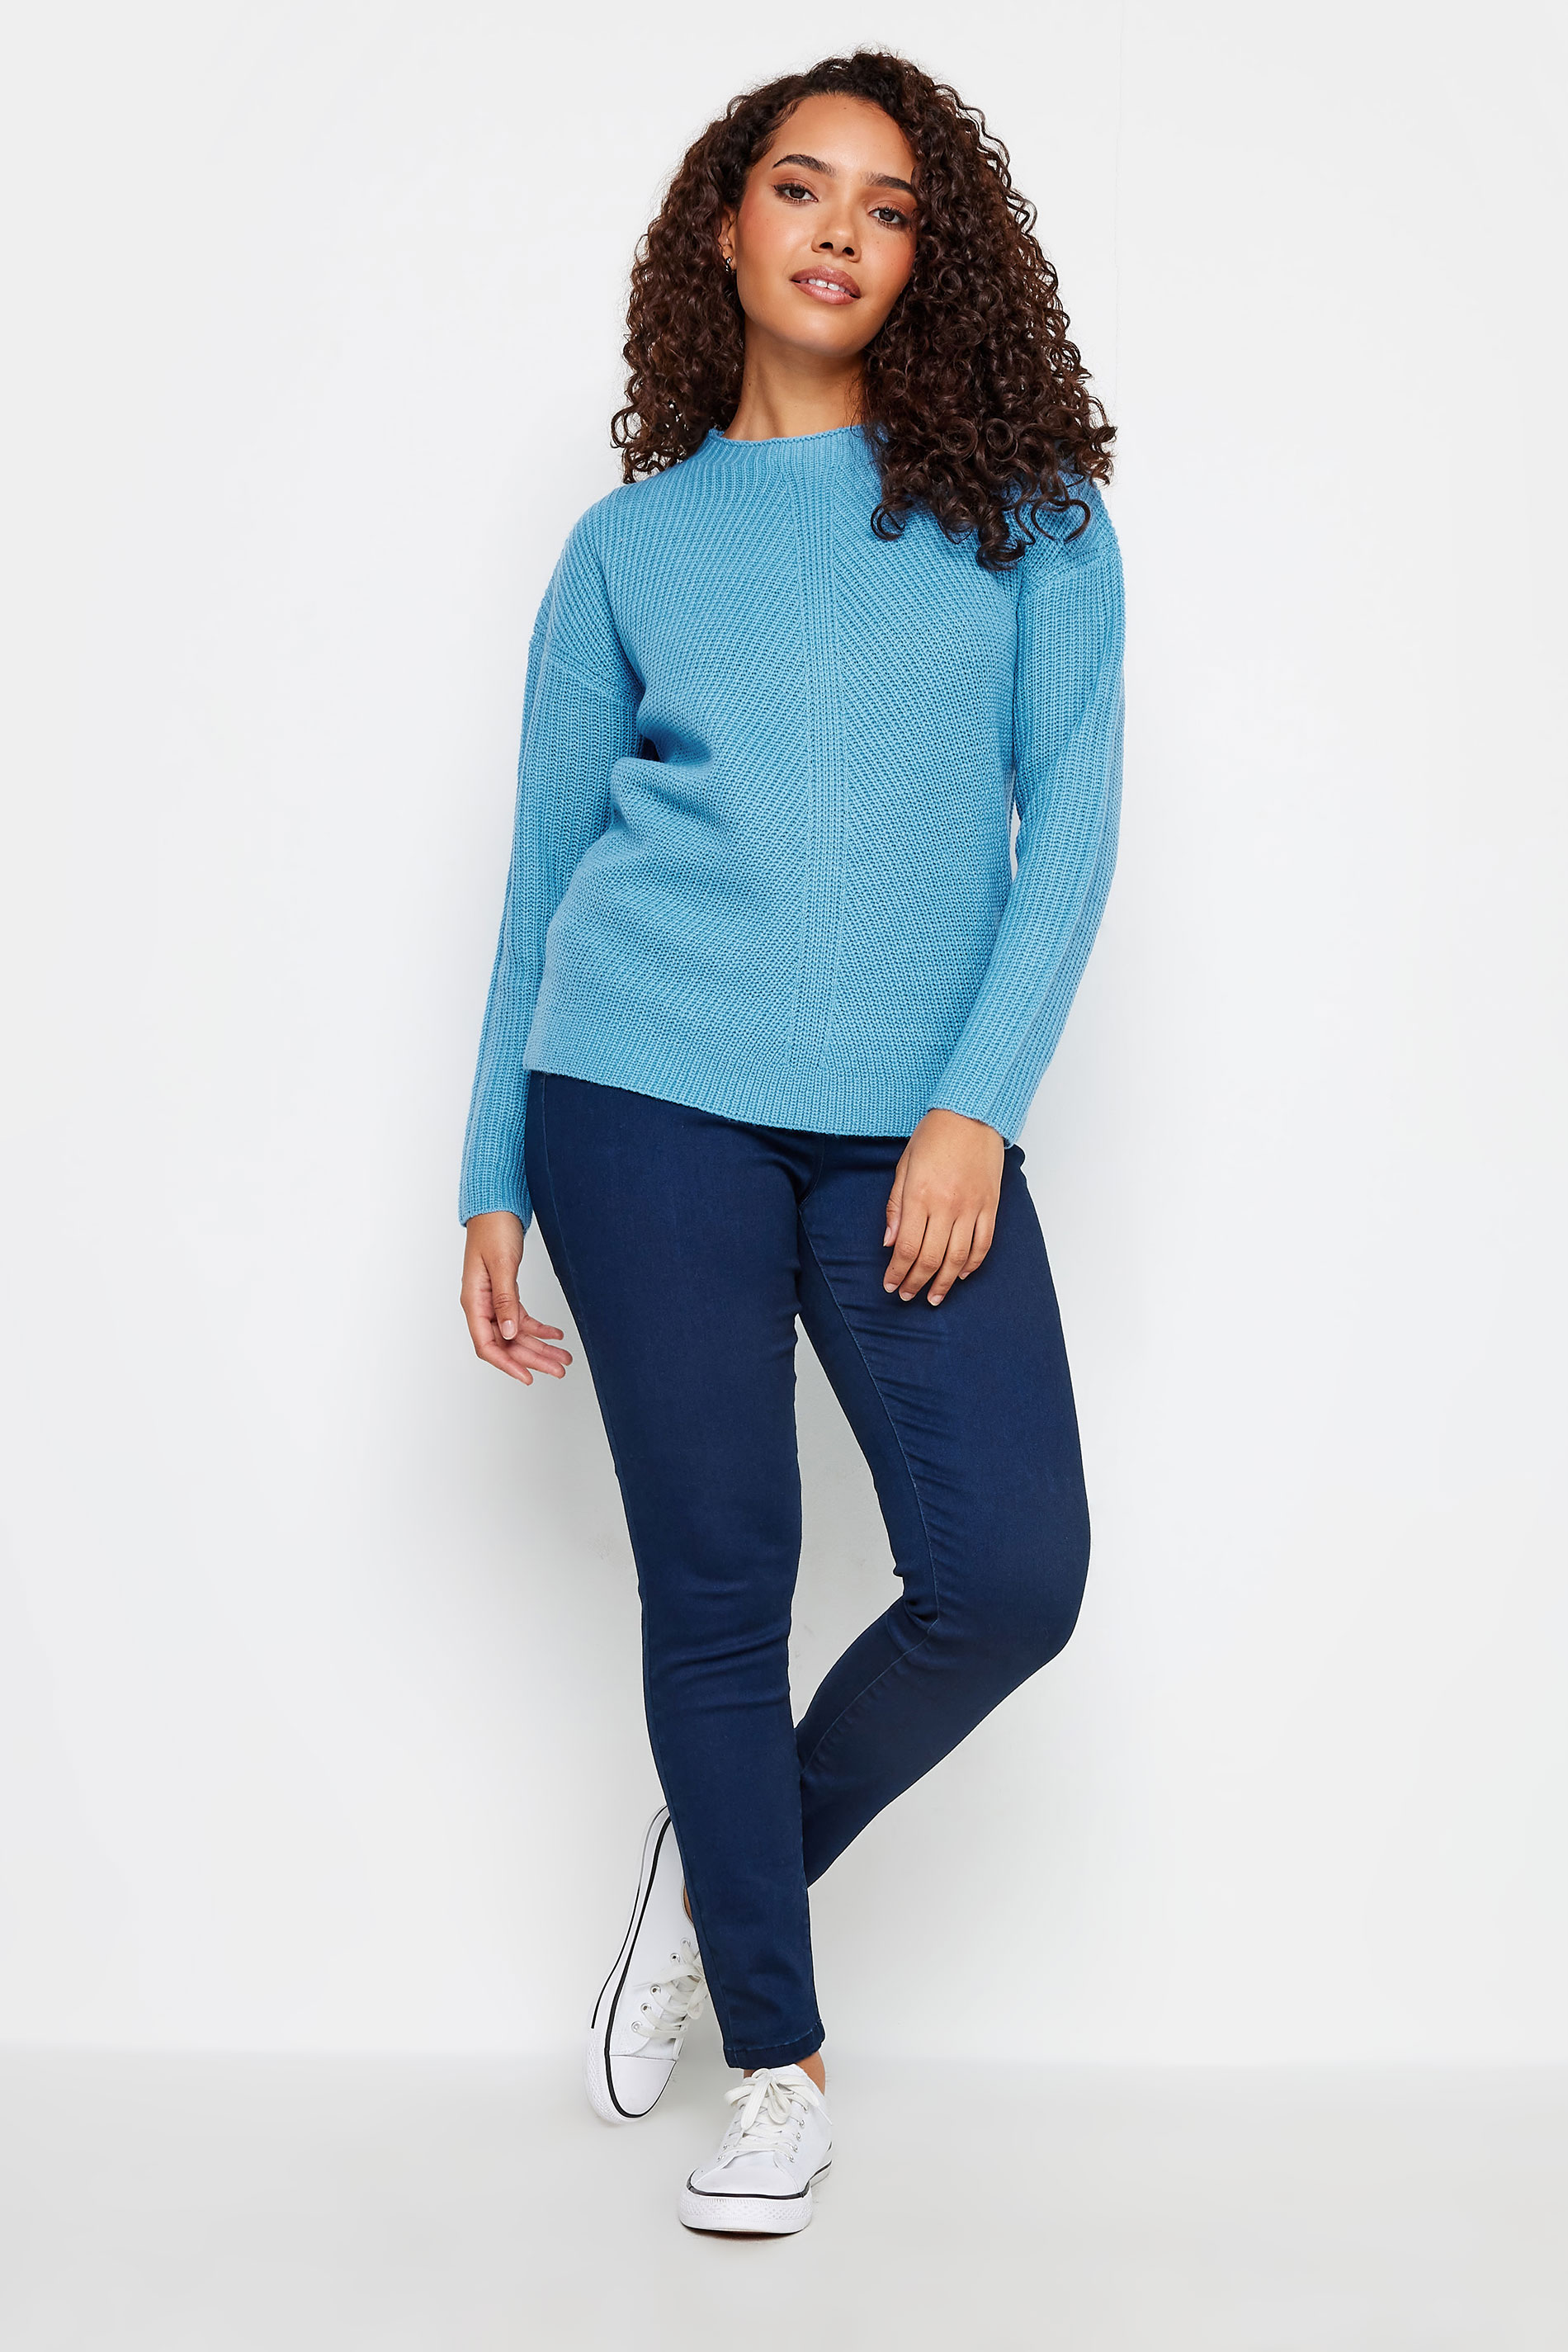 M&Co Blue Funnel Neck Knitted Jumper | M&Co 2